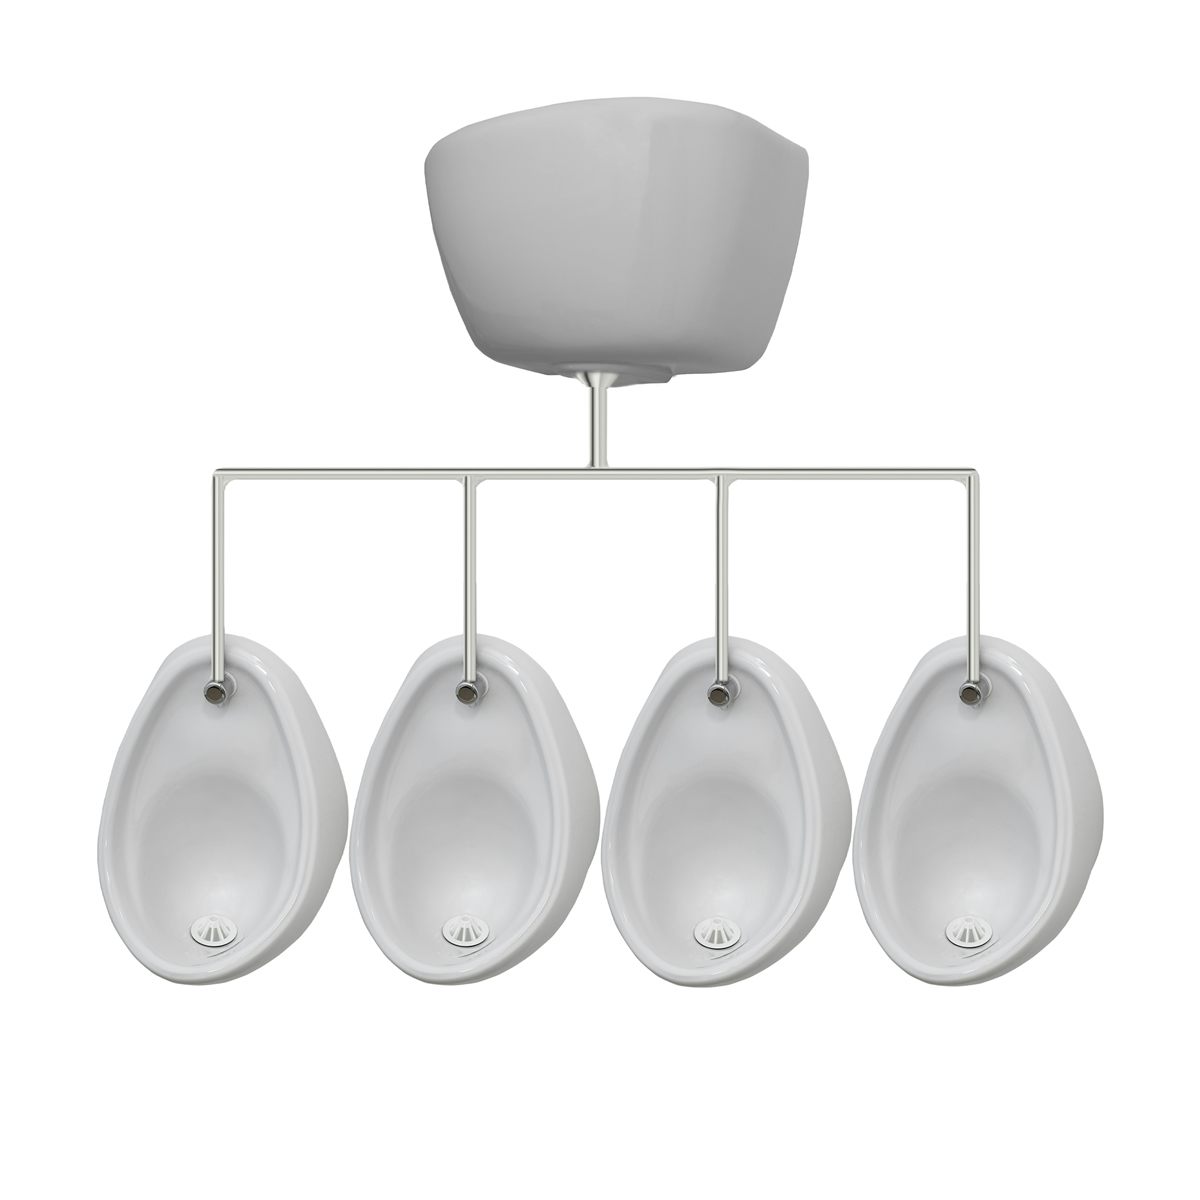 Kirke Curve complete top in exposed urinal 400mm pack for 4 bowls